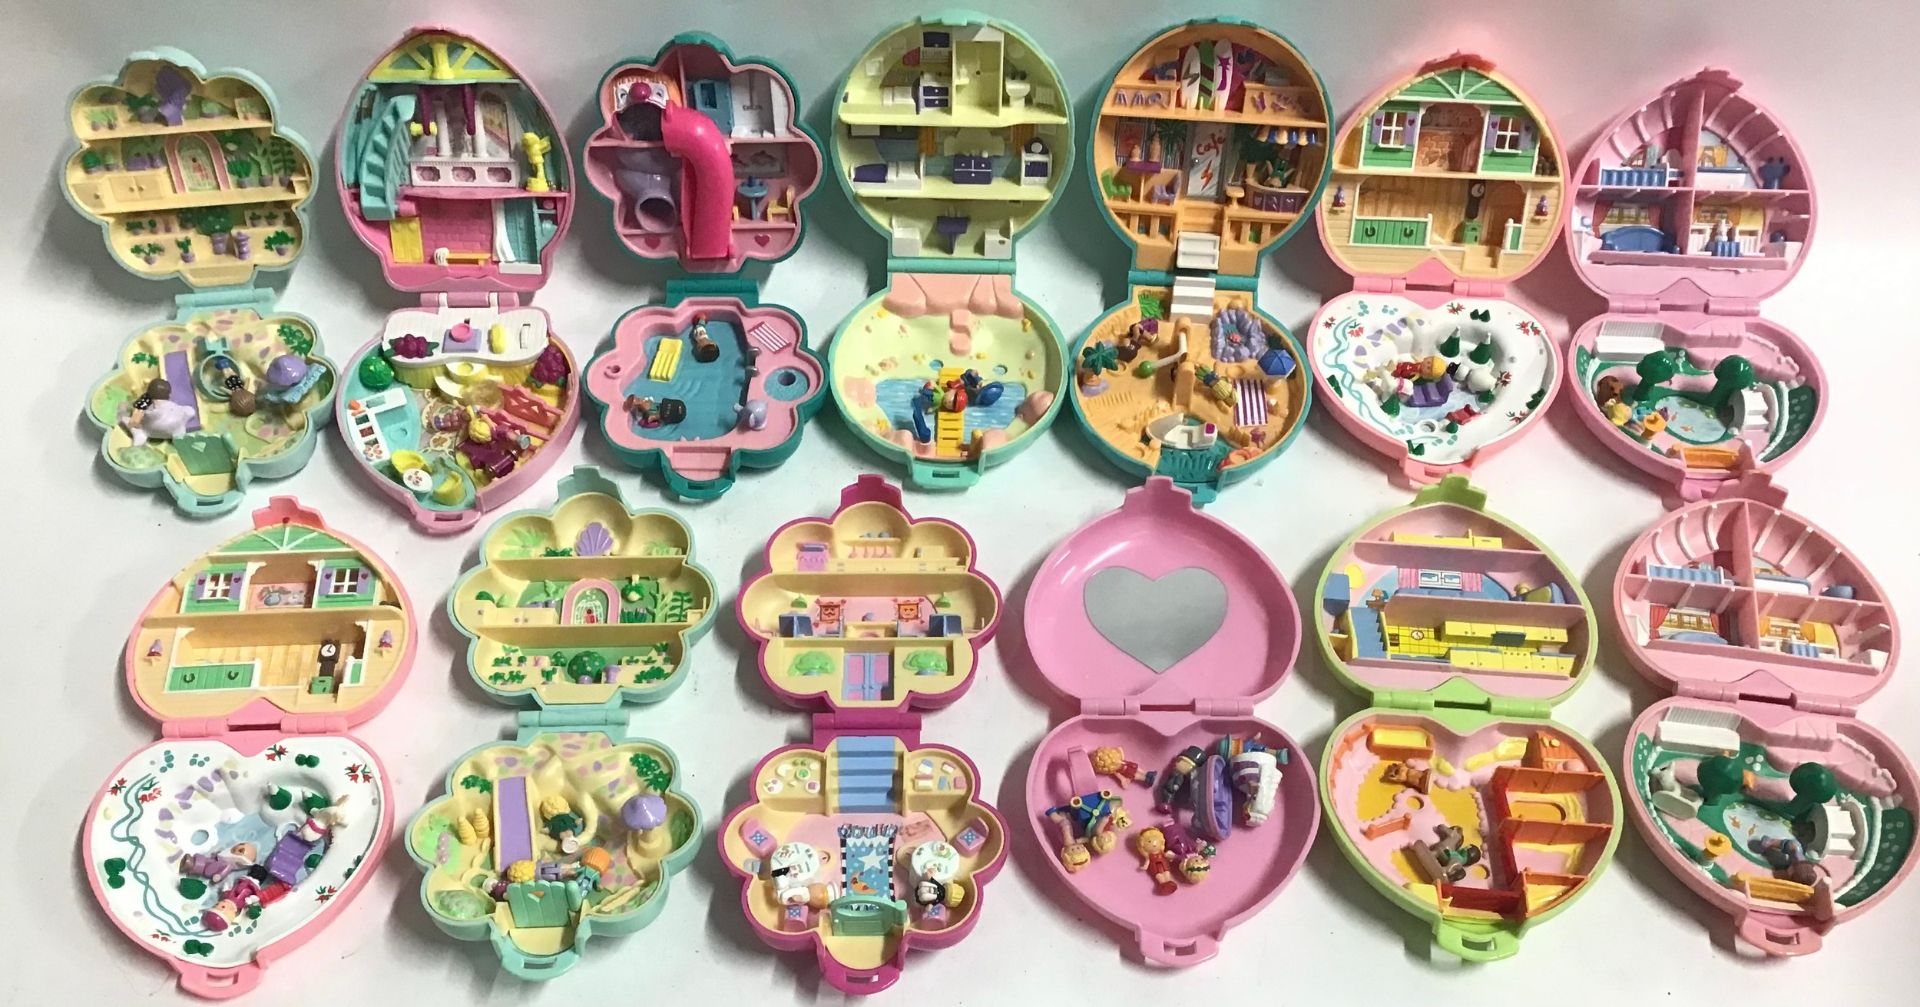 Bluebird Mattel Polly Pocket vintage compacts and playsets (40 altogether), mostly with figures - Image 8 of 15